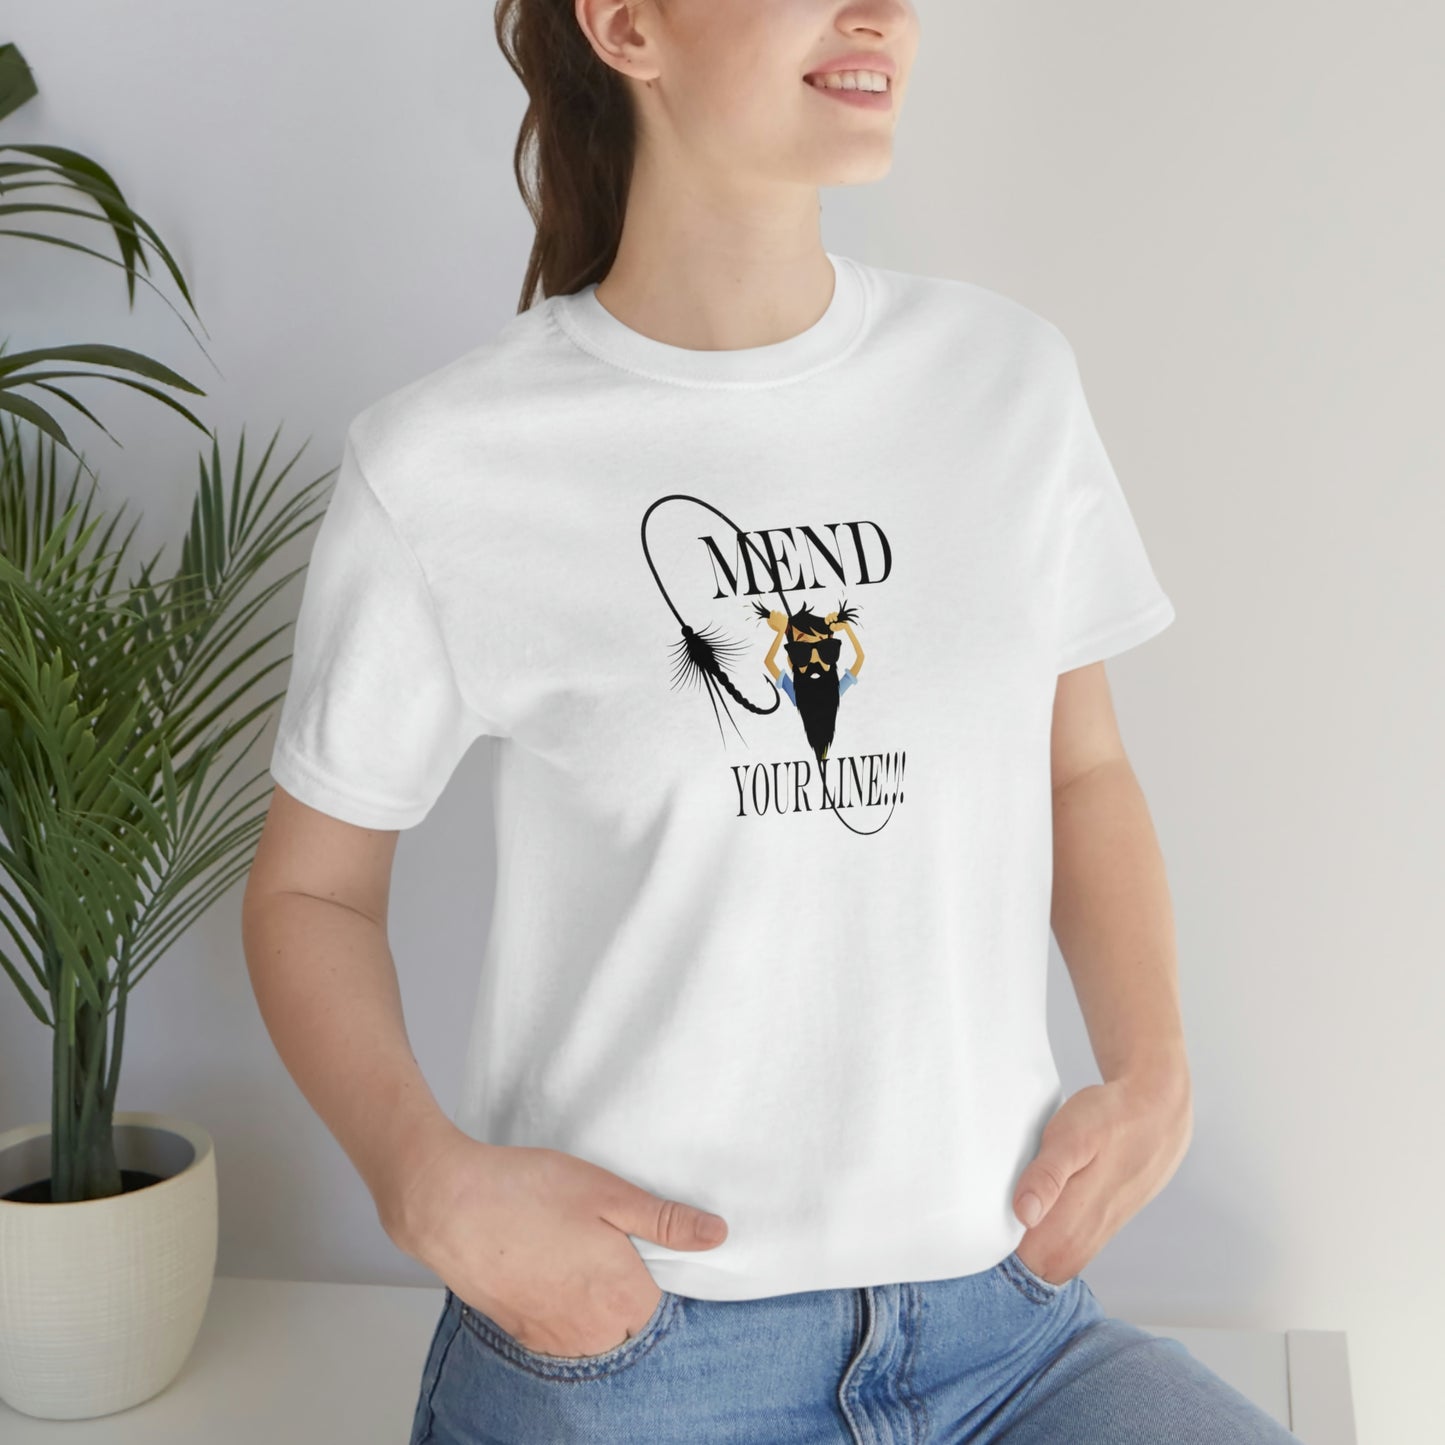 Mend Your Line T